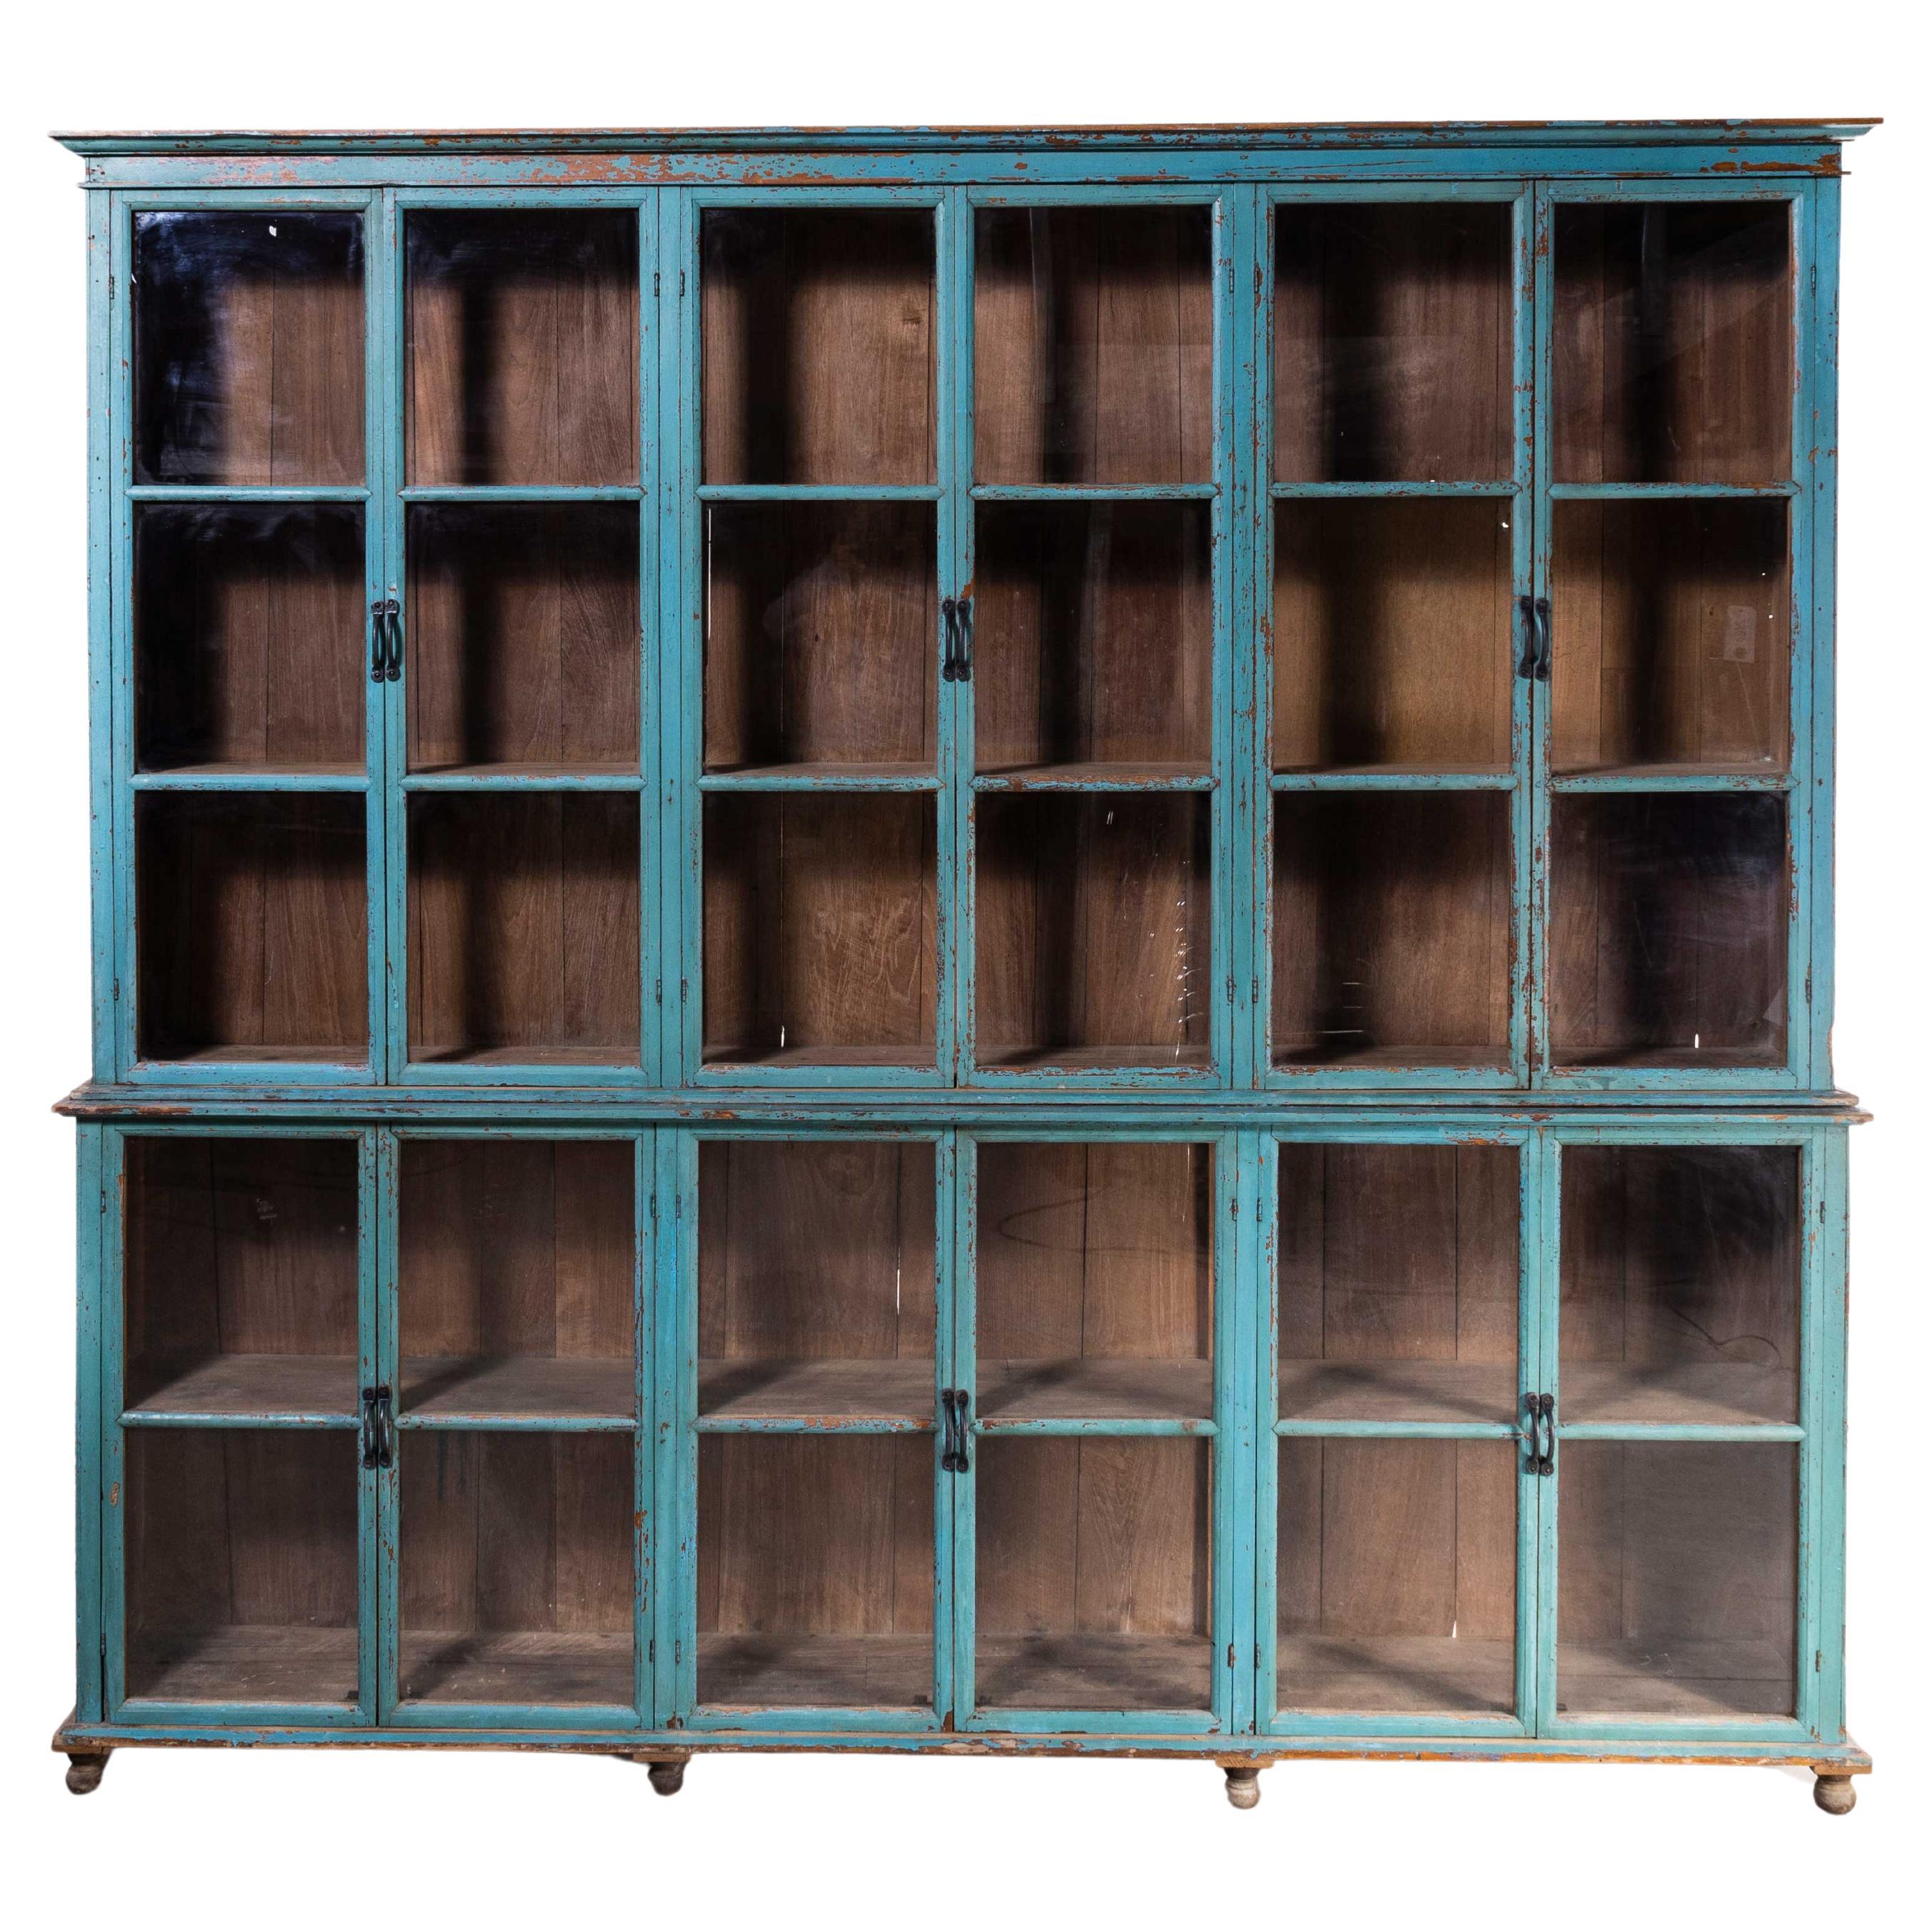 1950's Large Colonial Type Cabinet from Indonesia For Sale at 1stDibs